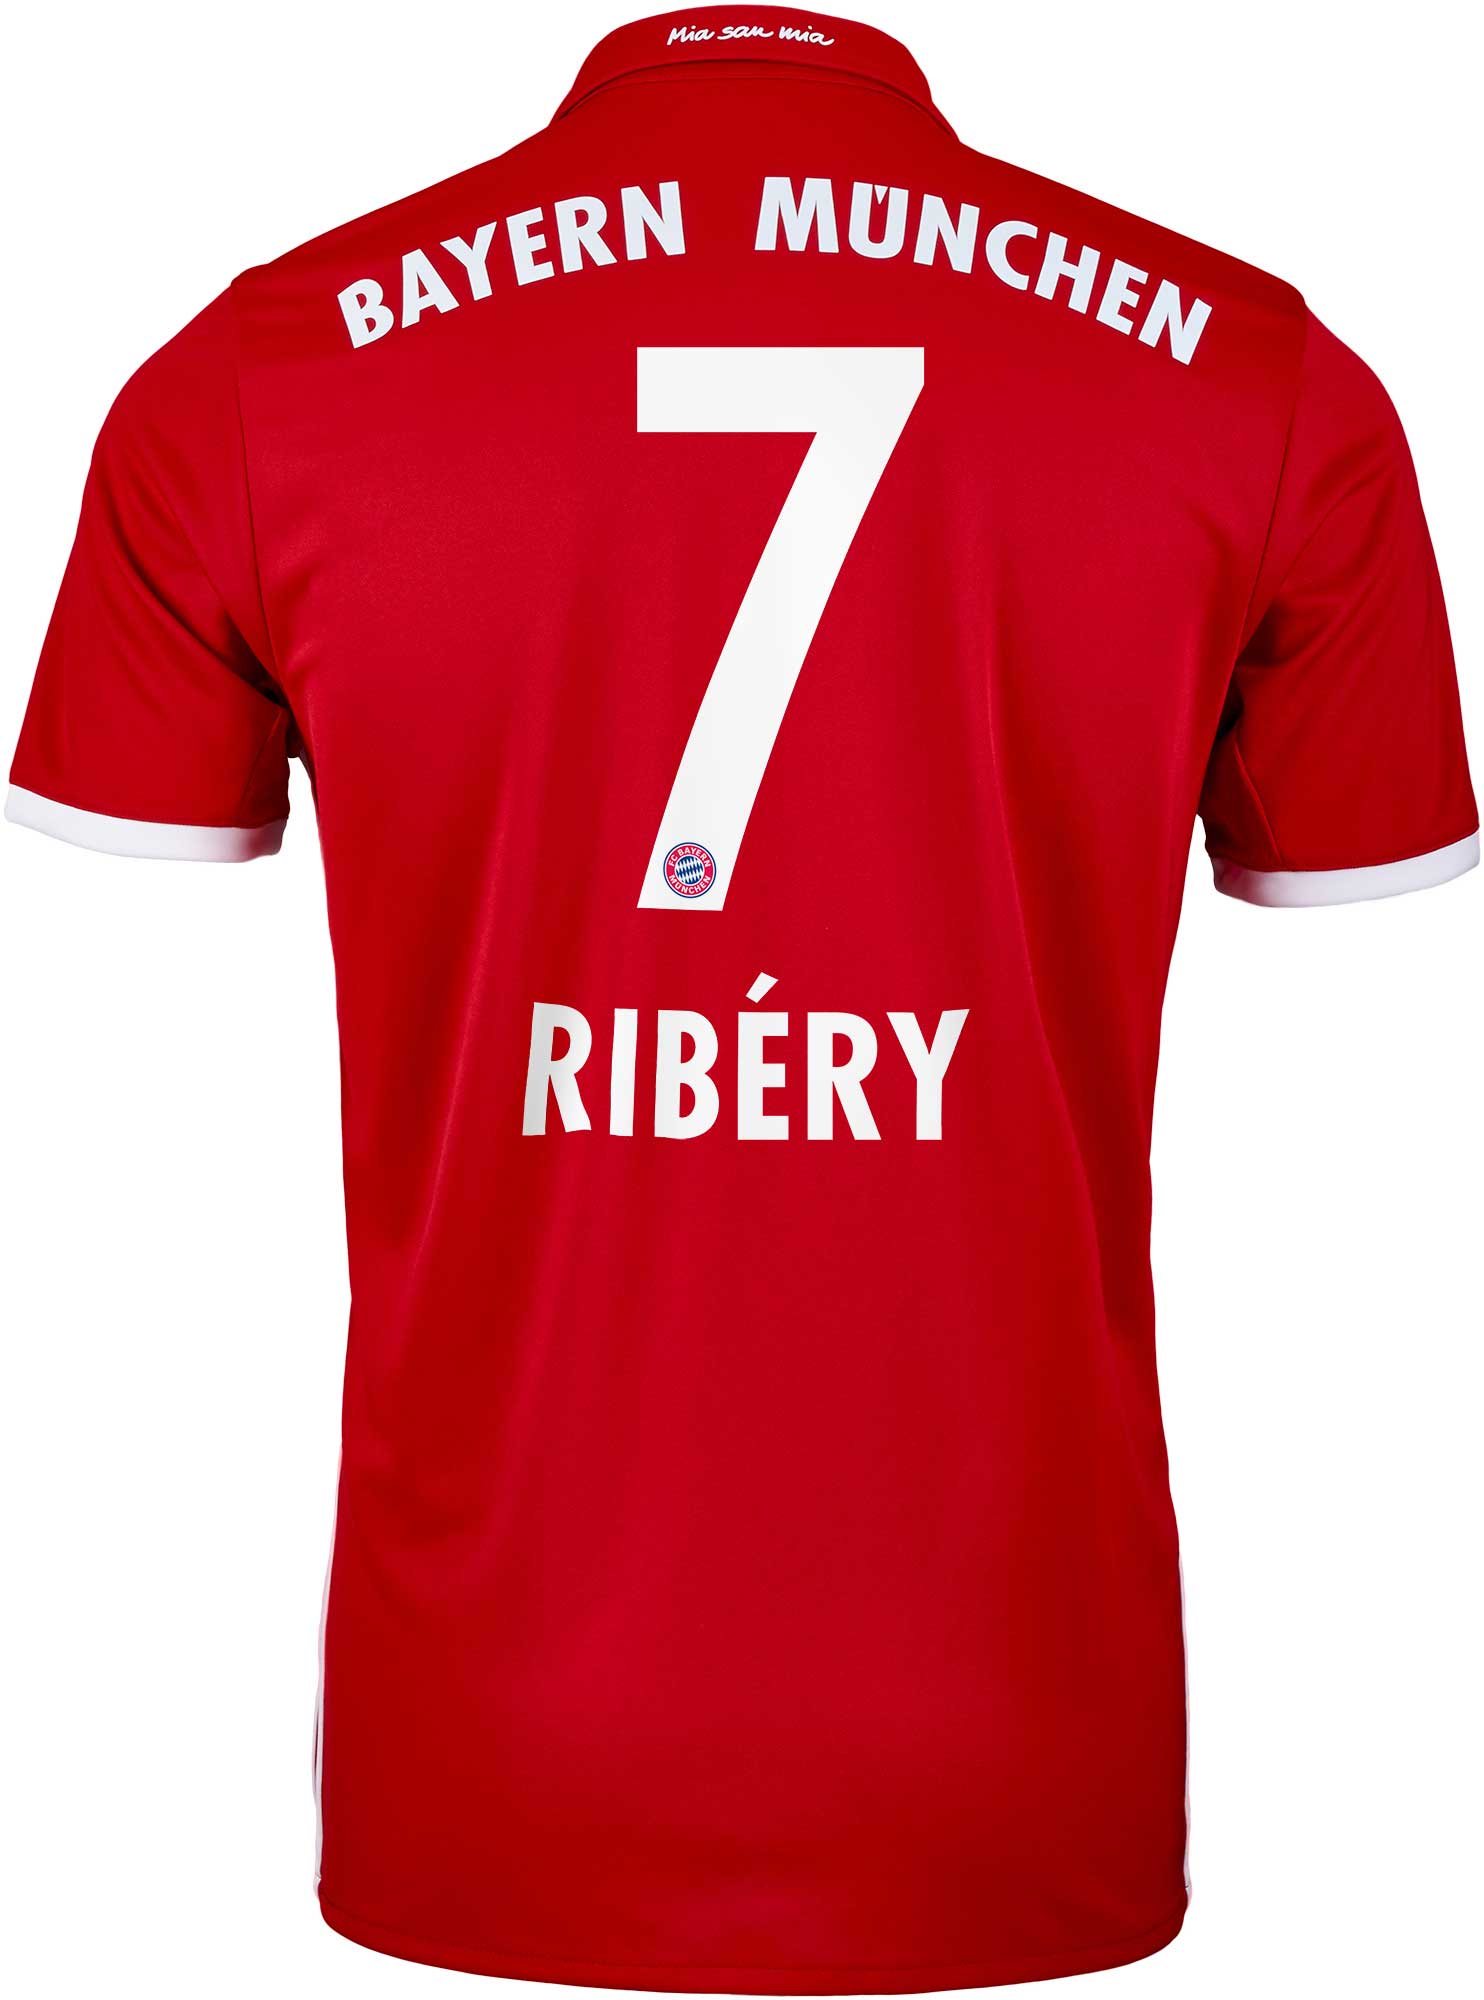 ribery jersey number